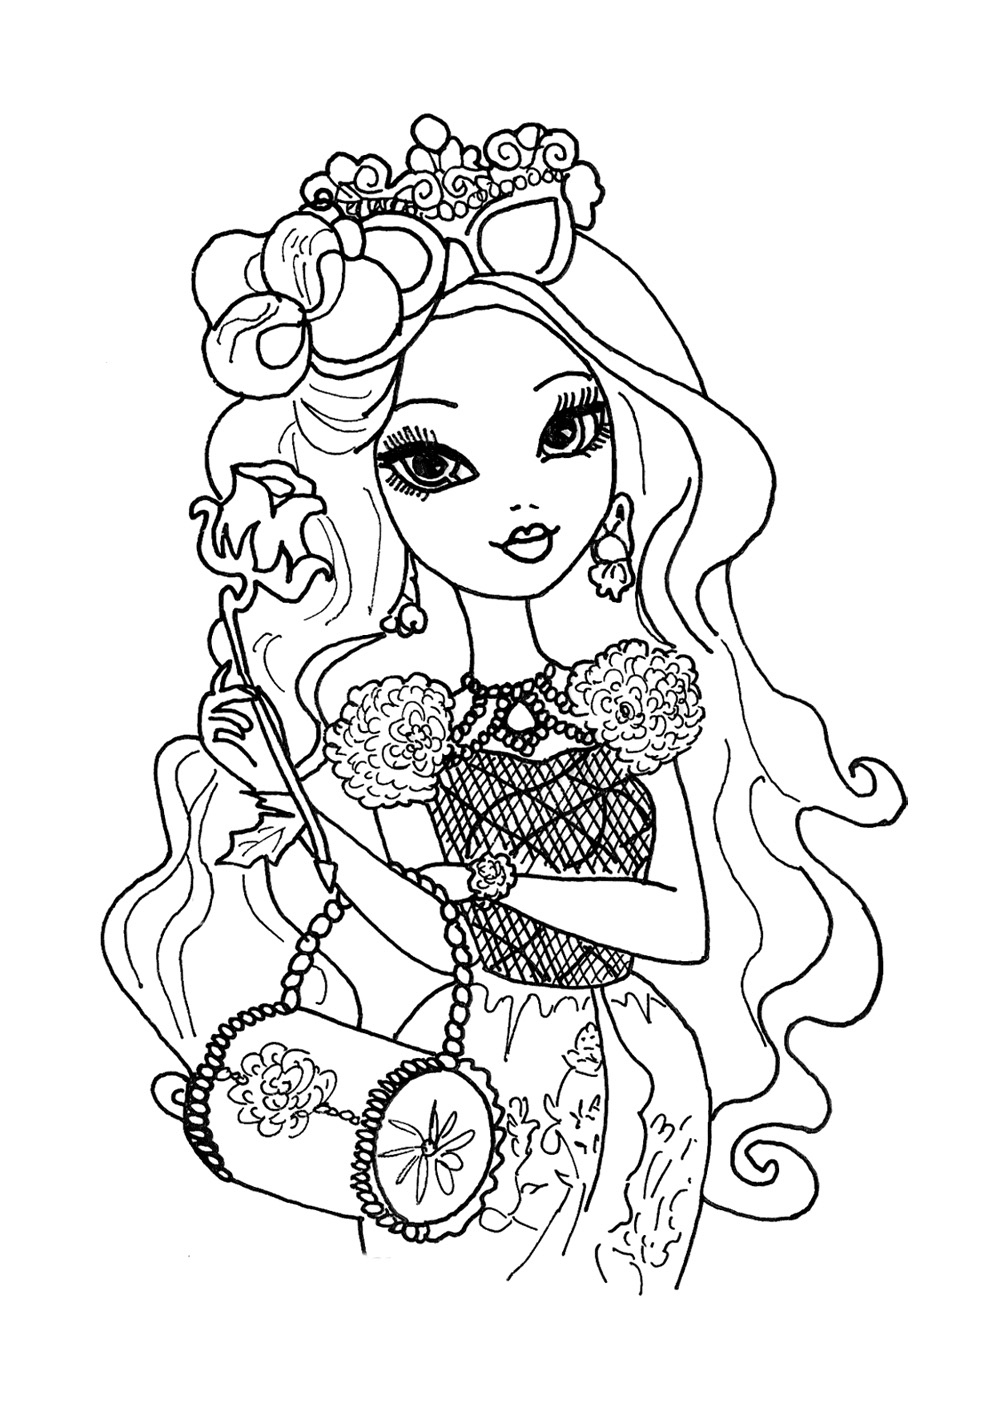 Download Ever After High coloring pages to download and print for free